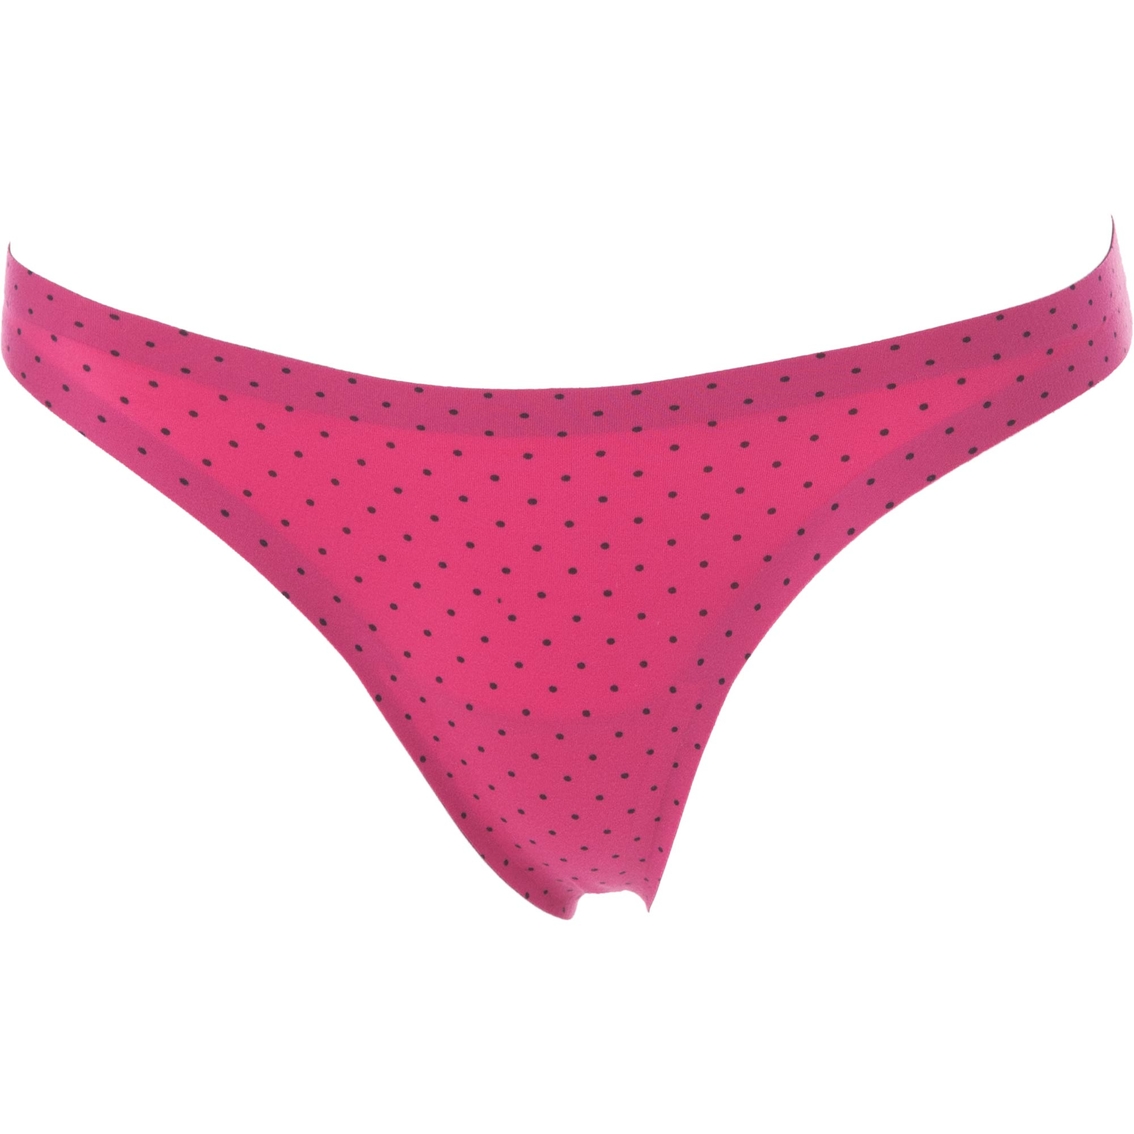 Maidenform Comfort Devotion Tailored Thong Panty